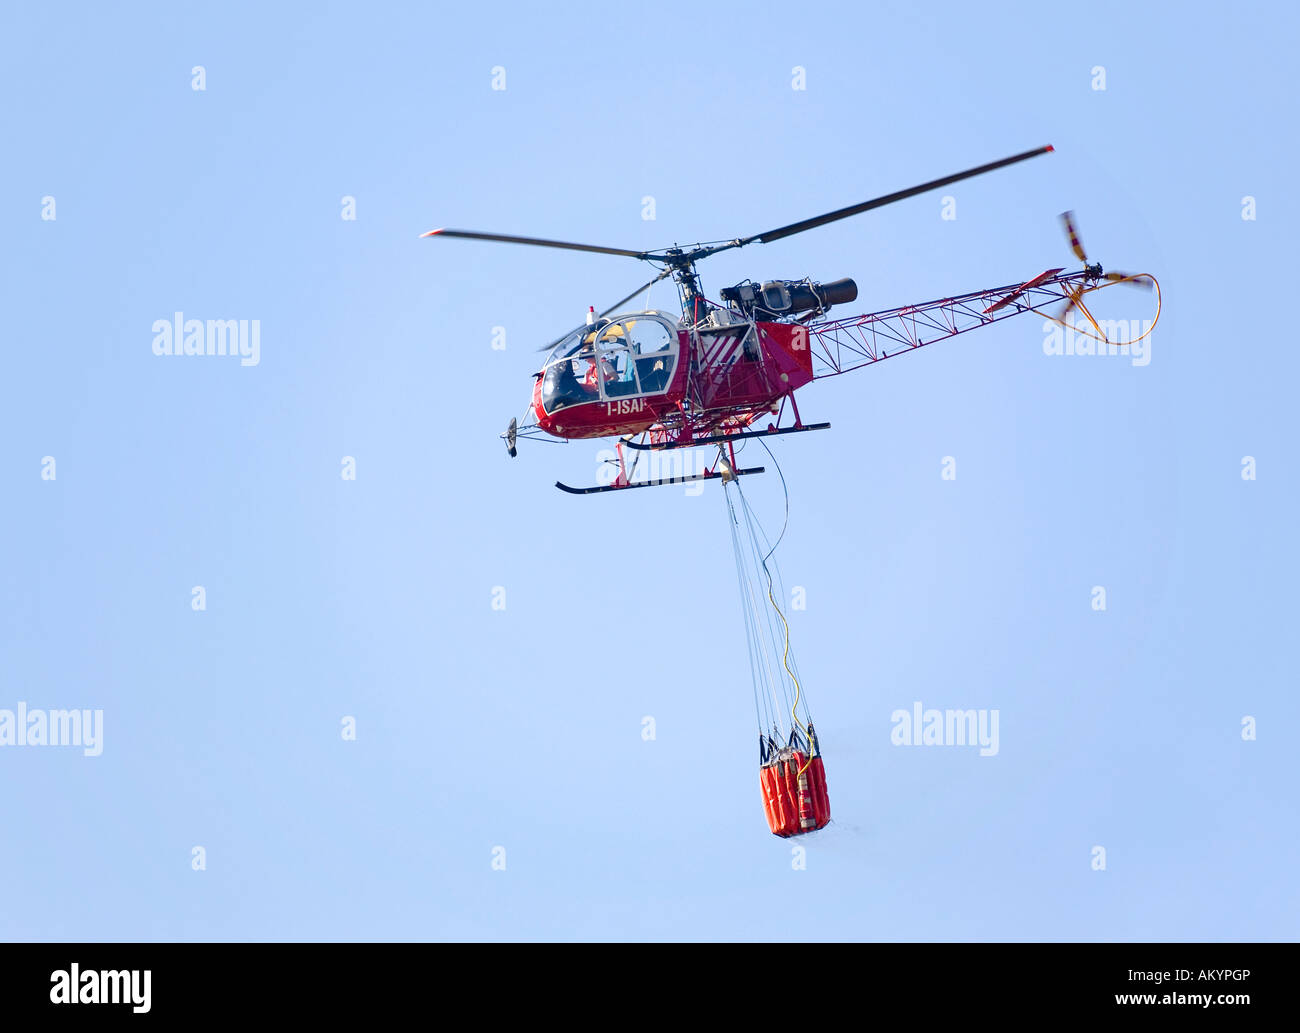 A helicopter brings water for firefighting, Sardinia, Italy Stock Photo